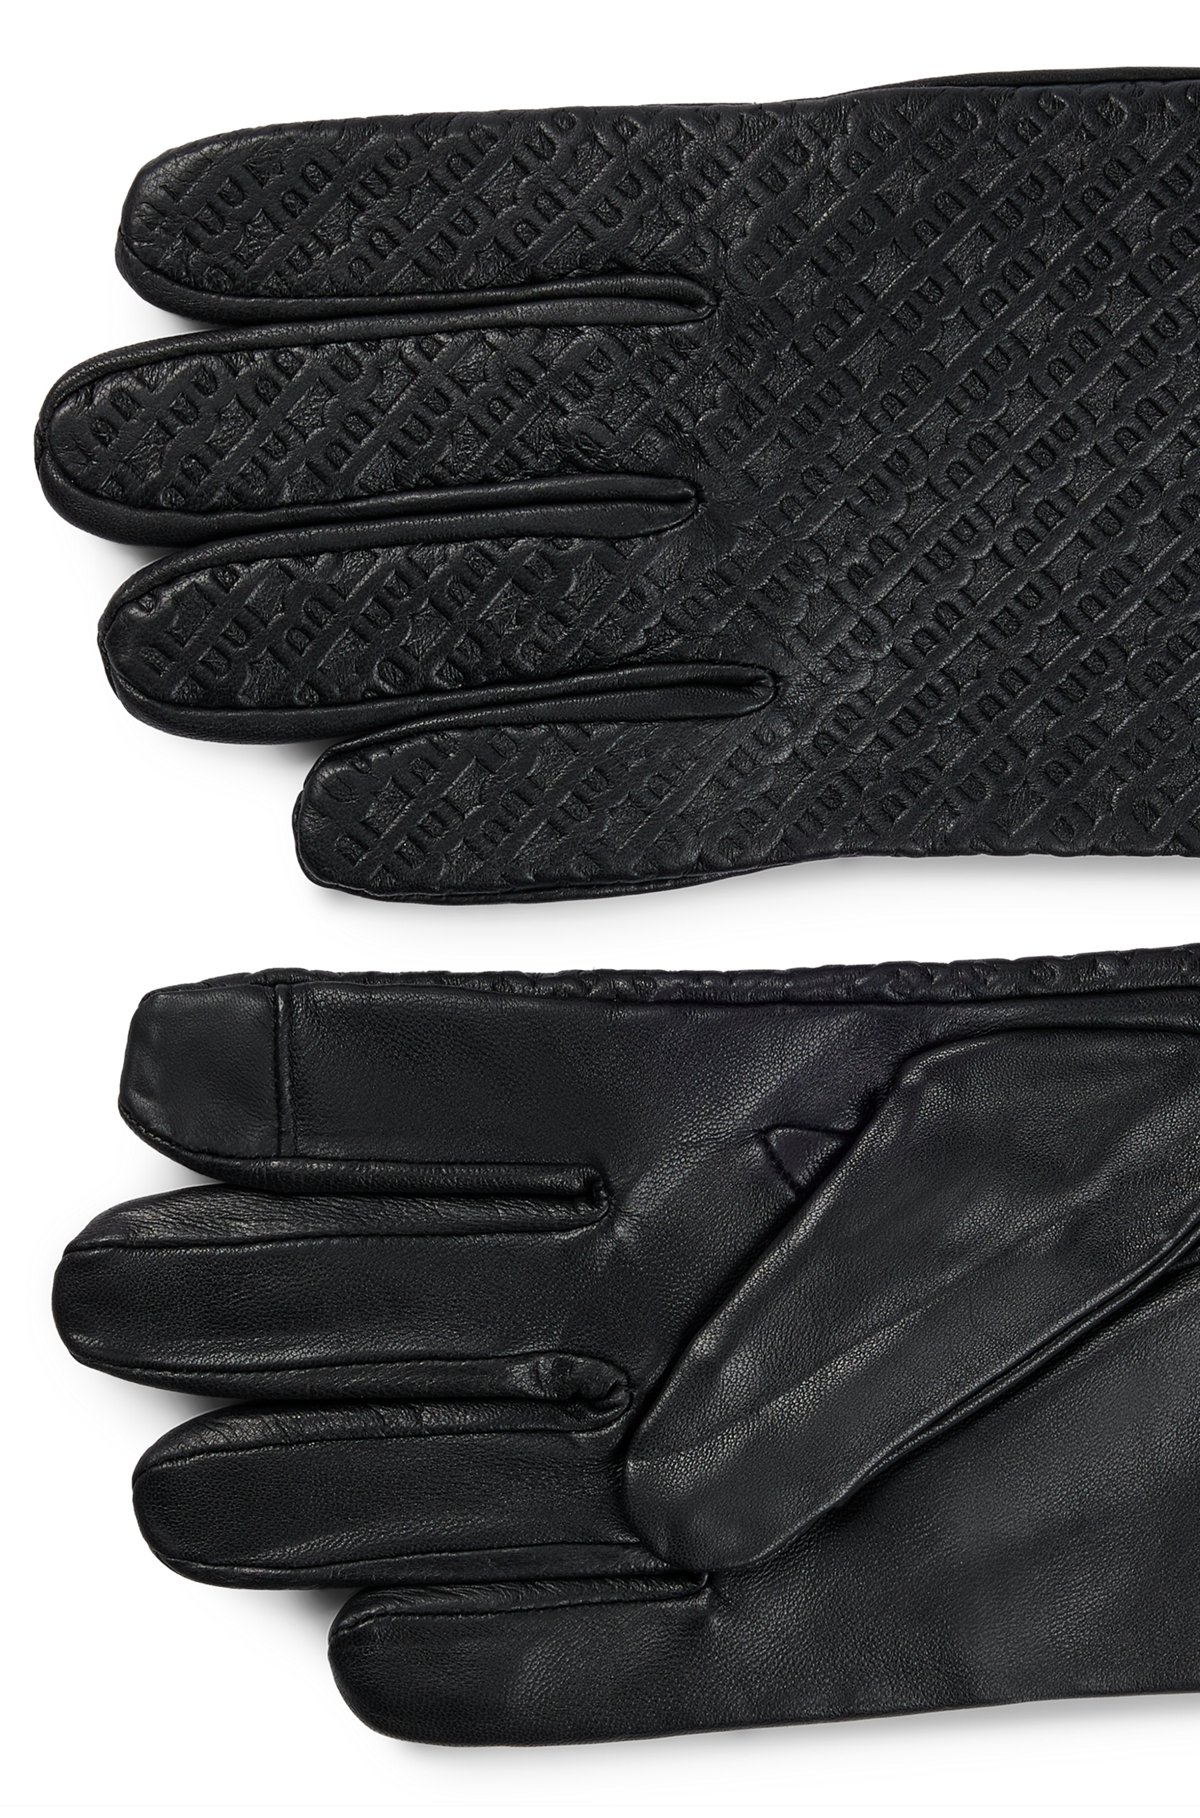 BOSS - Monogrammed gloves in leather with touchscreen-friendly fingertips